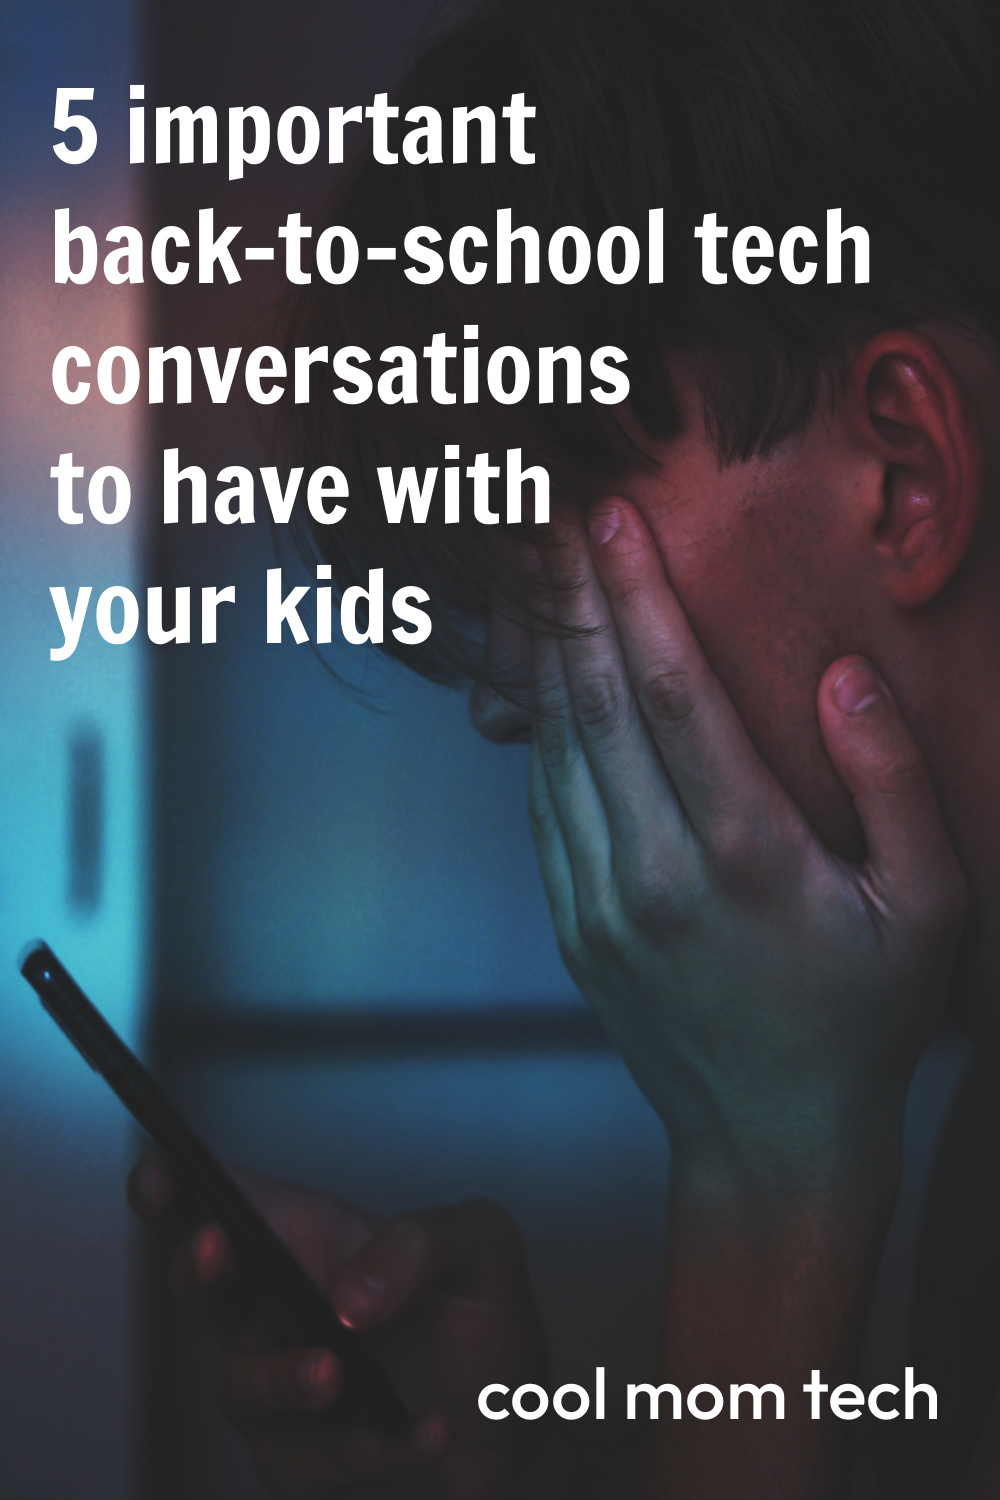 5 tech conversations for back to school that you should have with your kids | Cool Mom Tech